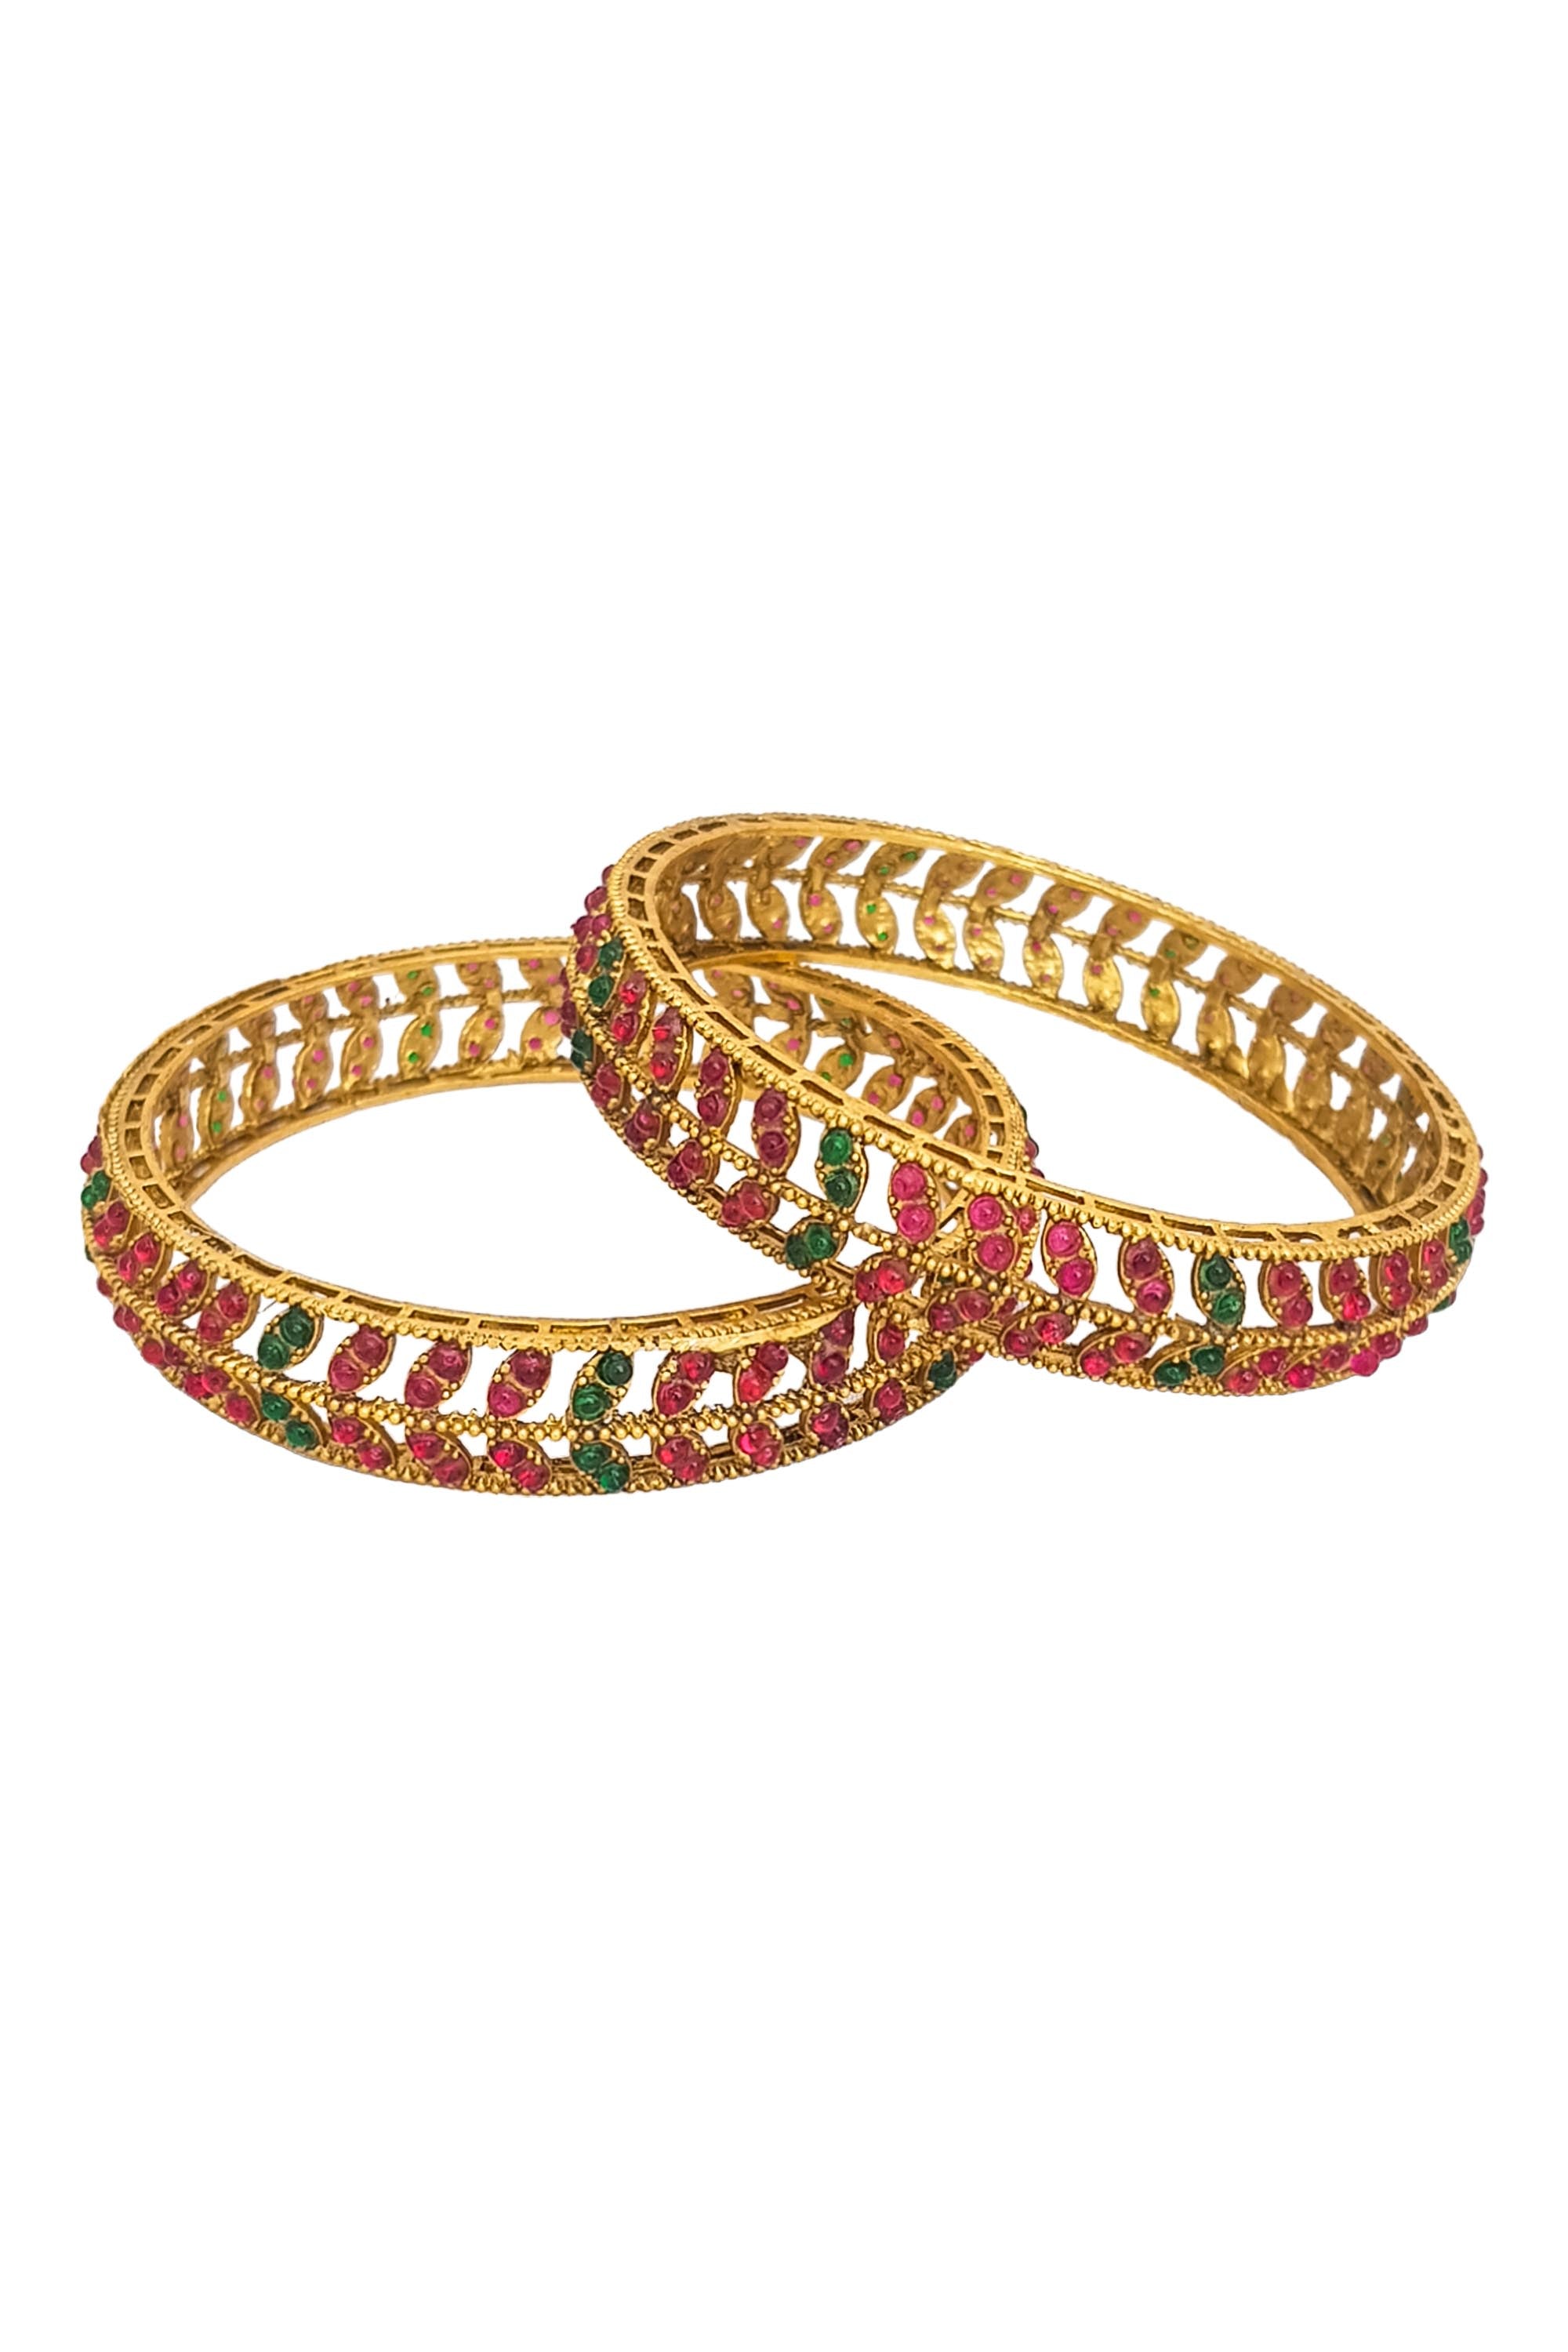 Bangle set of 2 temple collection 18292C